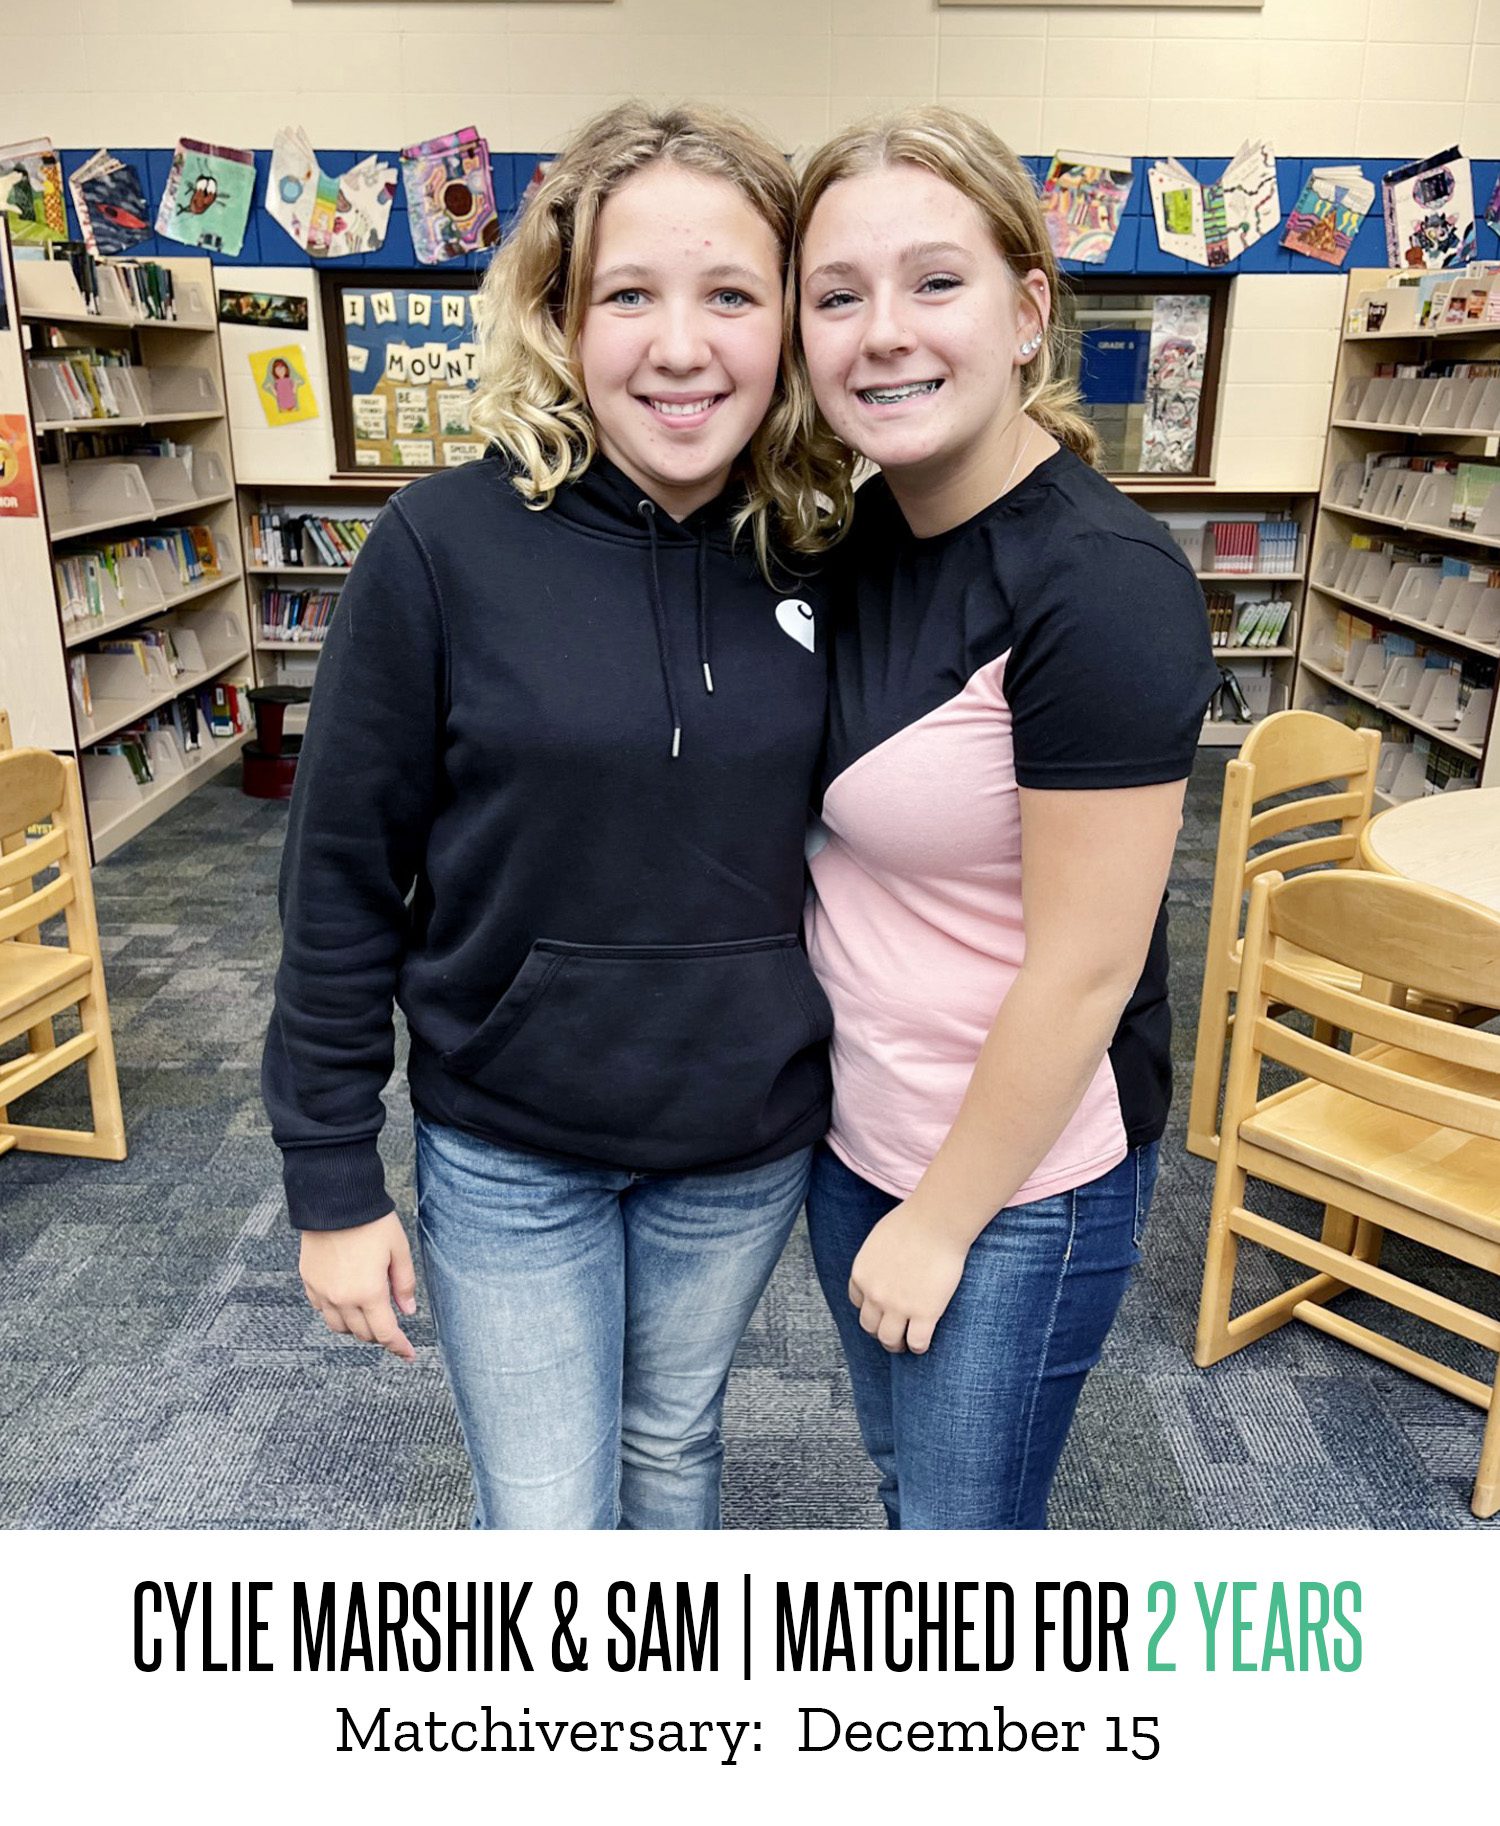 Cylie Marshik and Sam pose for a picture after being matched for two years